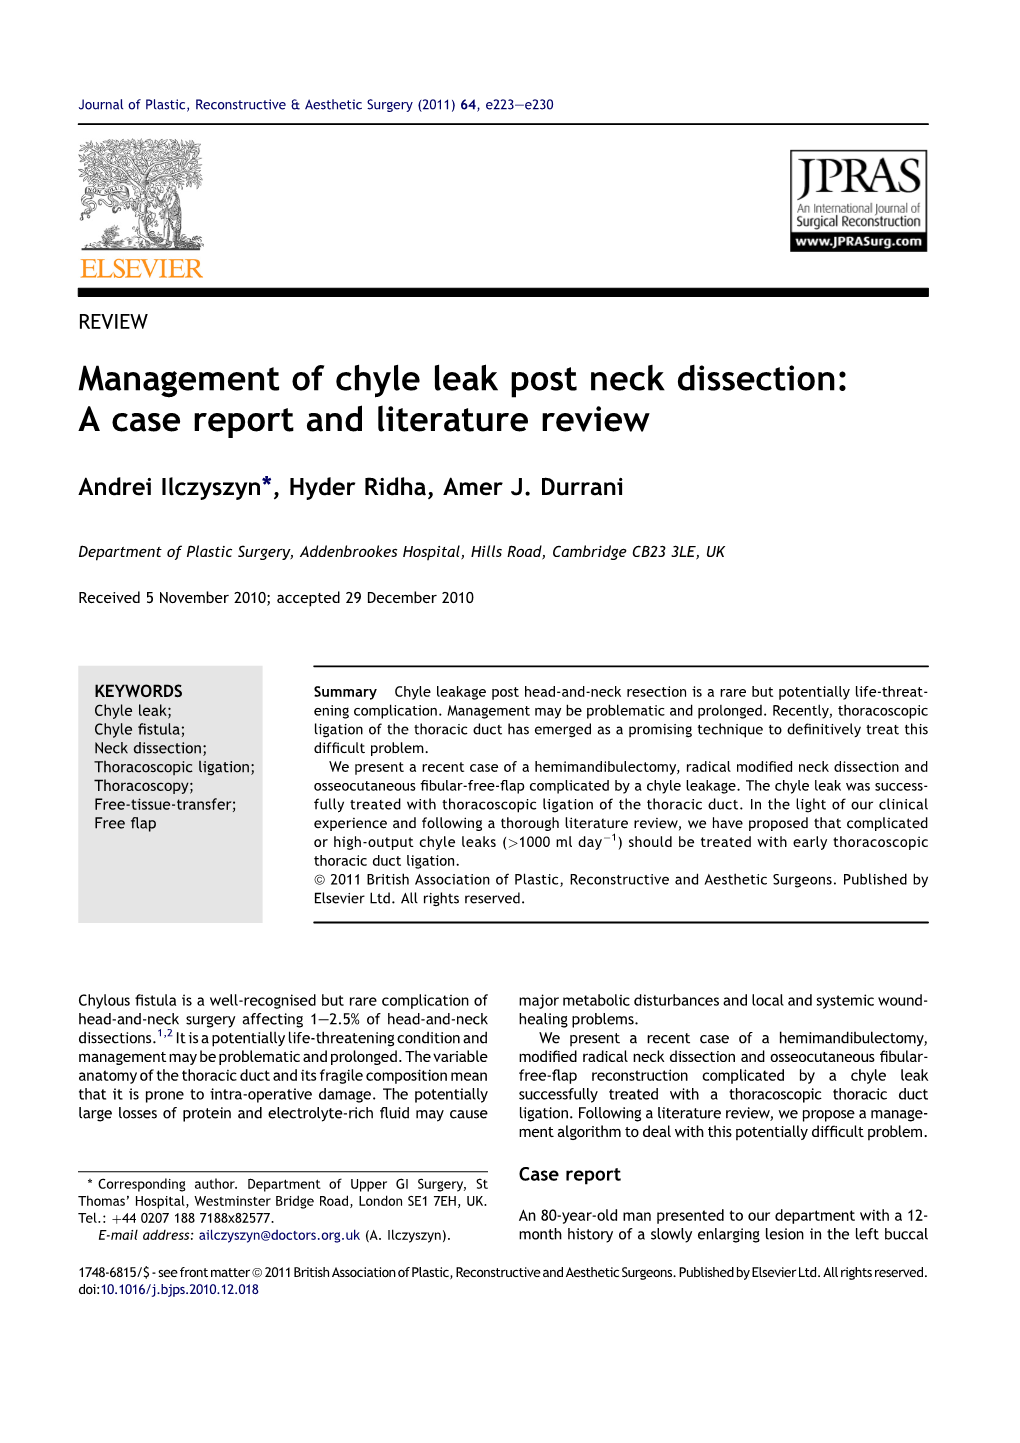 Management of Chyle Leak Post Neck Dissection: a Case Report and Literature Review